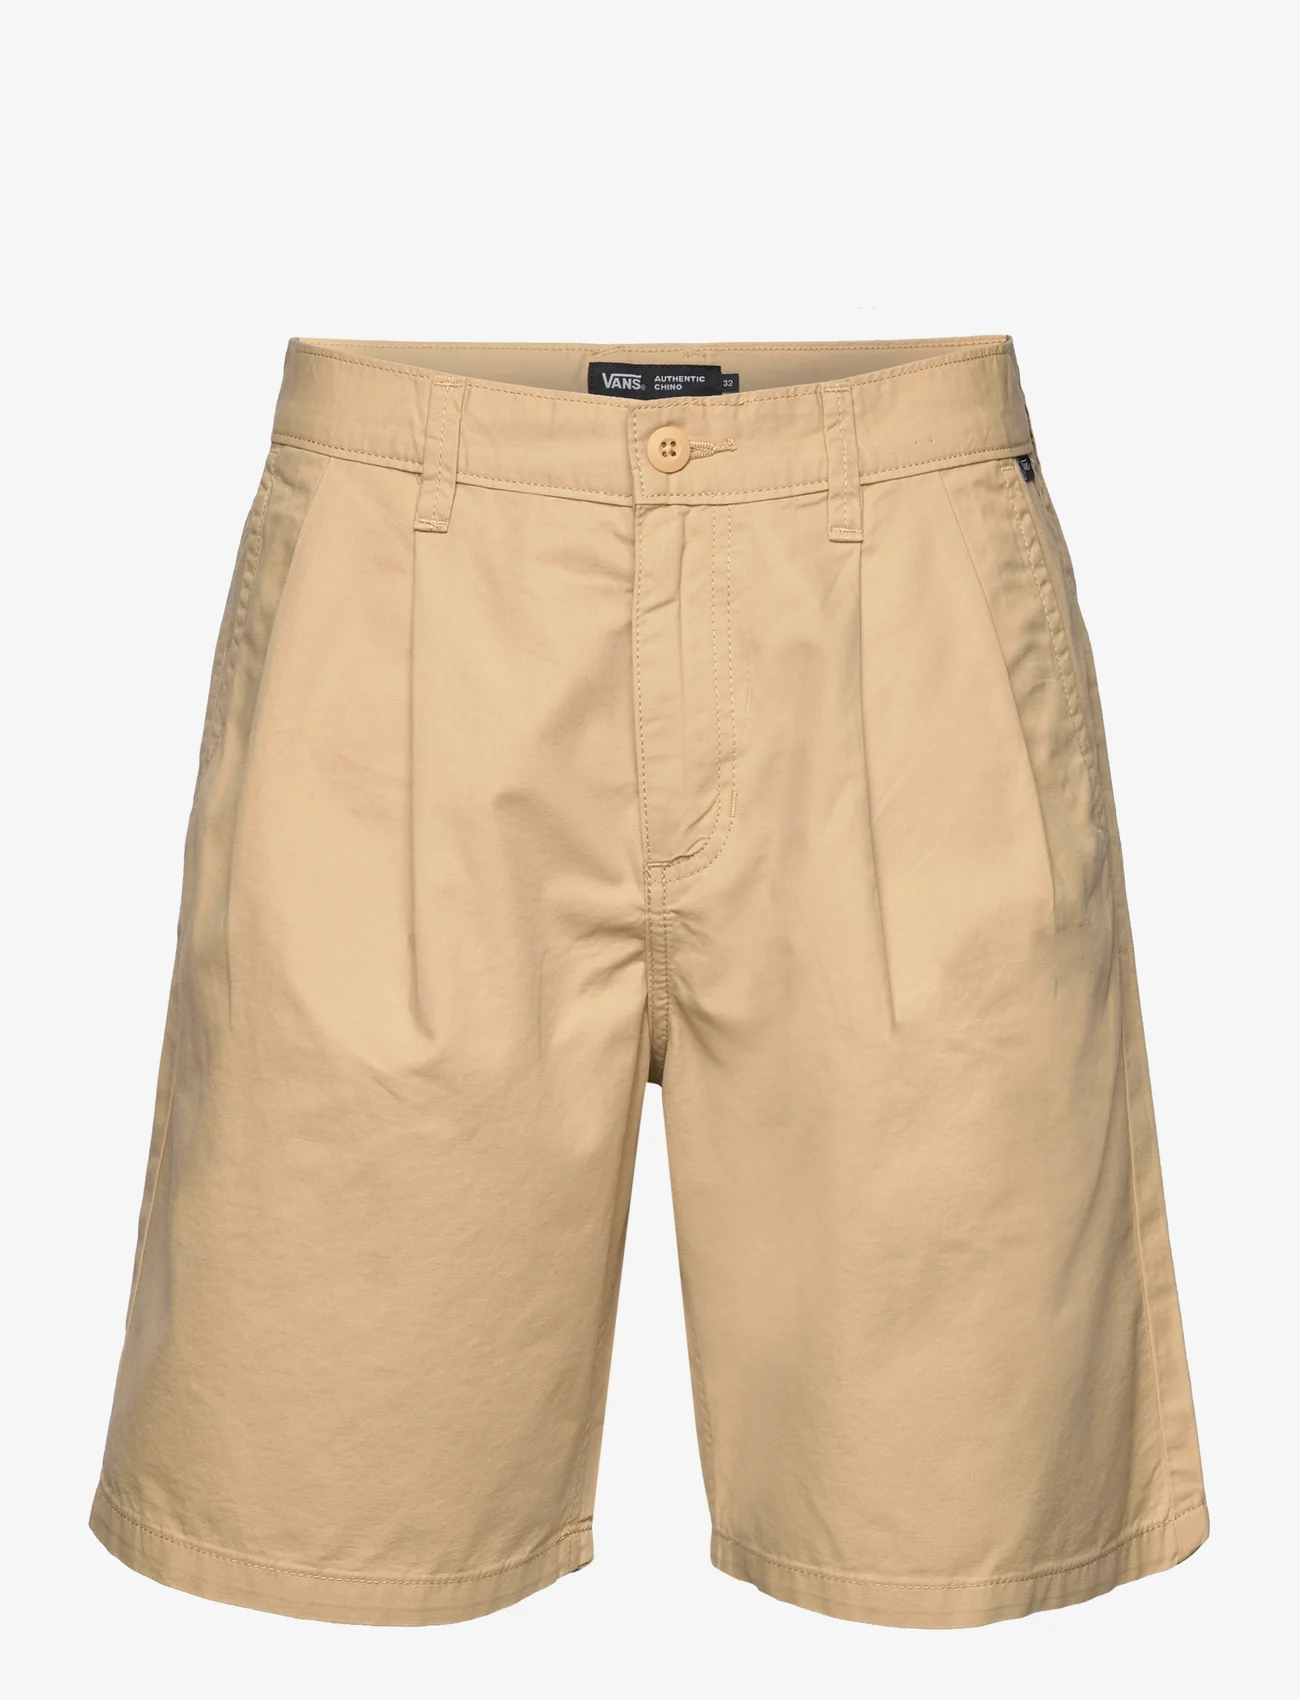 VANS - AUTHENTIC CHINO PLEATED LOOSE SHORT - chinos shorts - taos taupe - 0